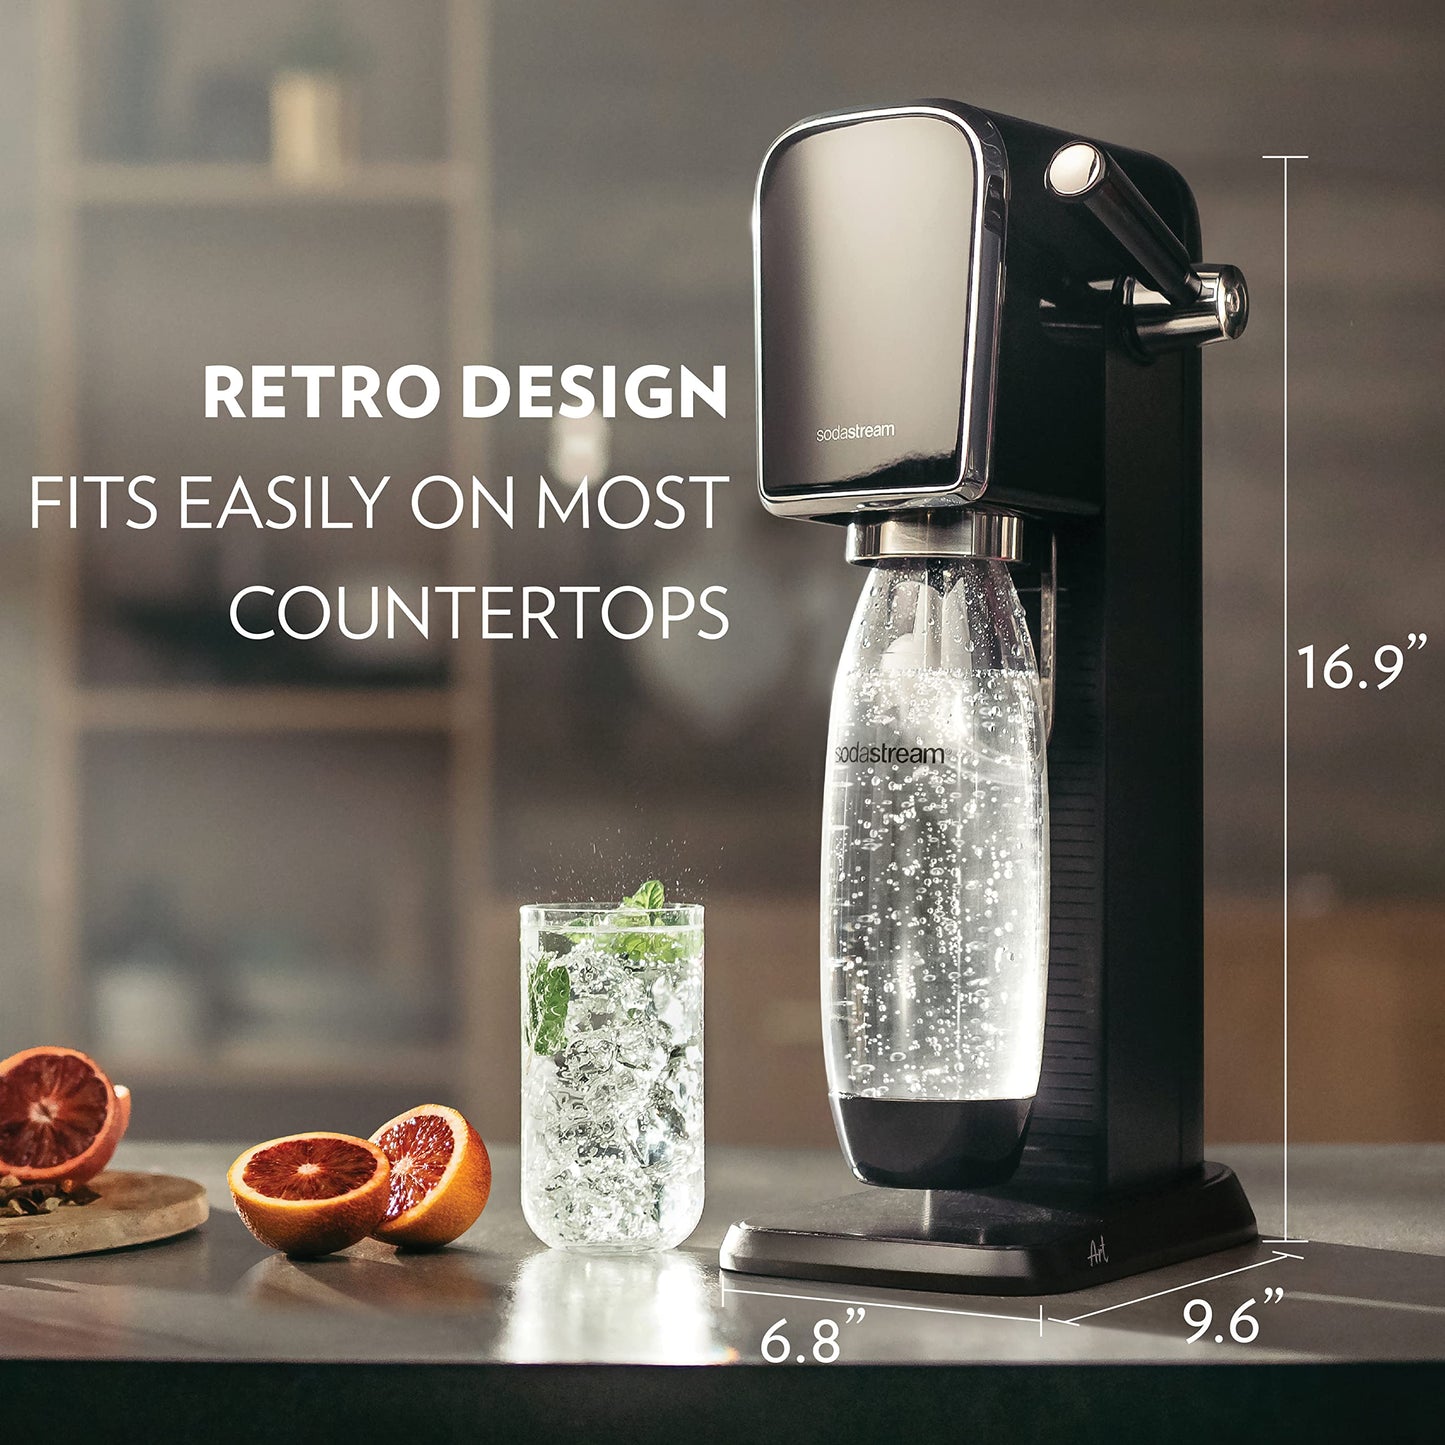 SodaStream Art Sparkling Water Maker Bundle (White), with CO2, DWS Bottles, and Bubly Drops Flavors